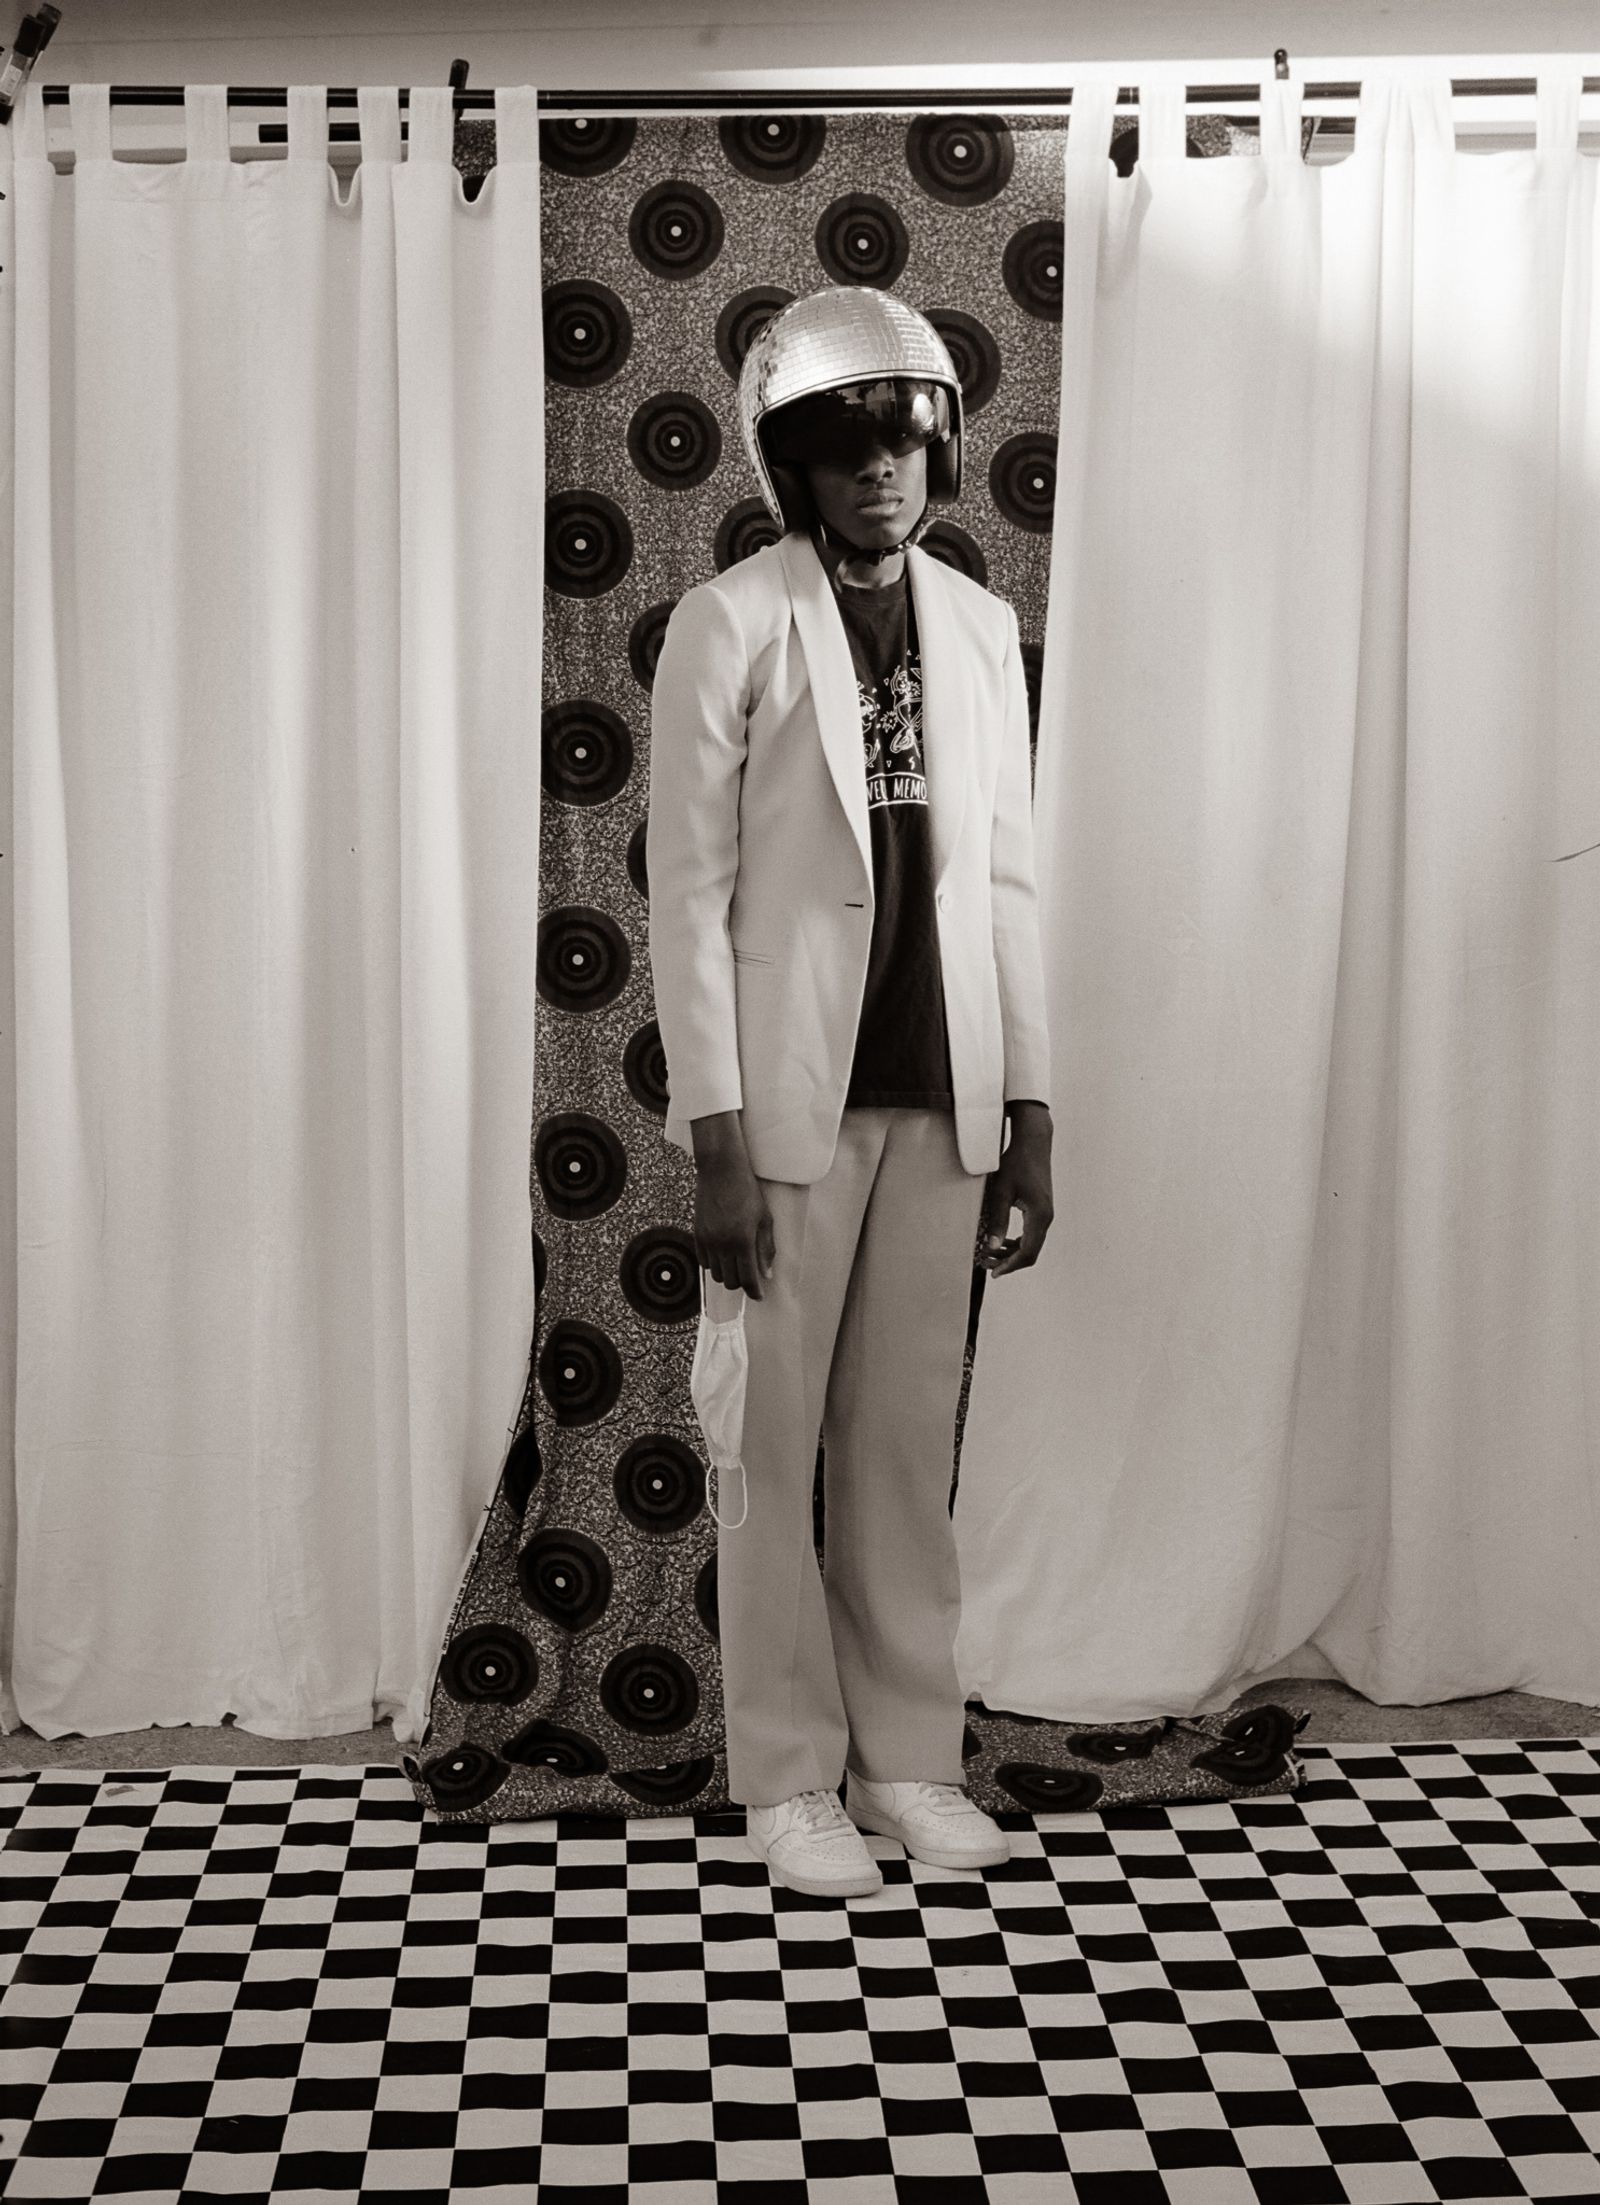 © Ozodi Onyeabor - The Asher Show. Our protagonist takes center stage. "Lights, Camera..."